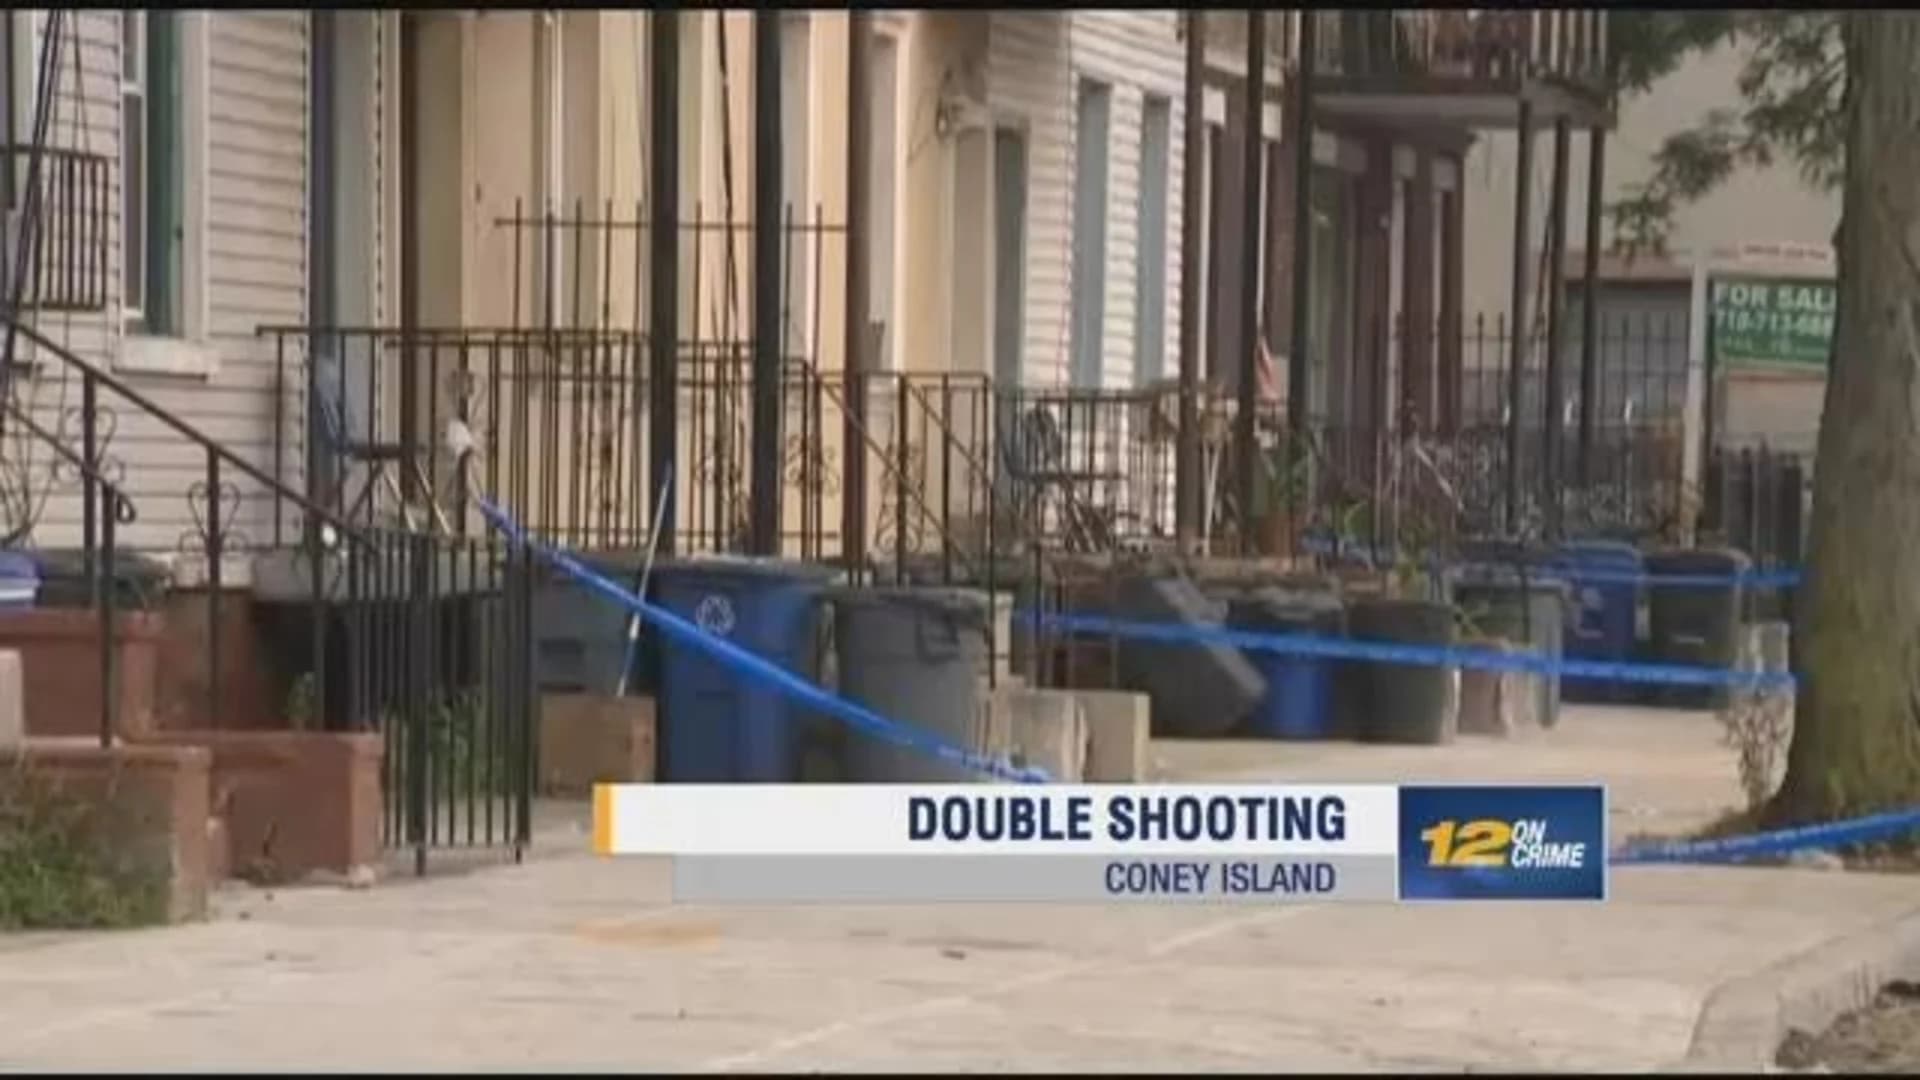 Police: 2 men fatally shot in Coney Island, suspect at large